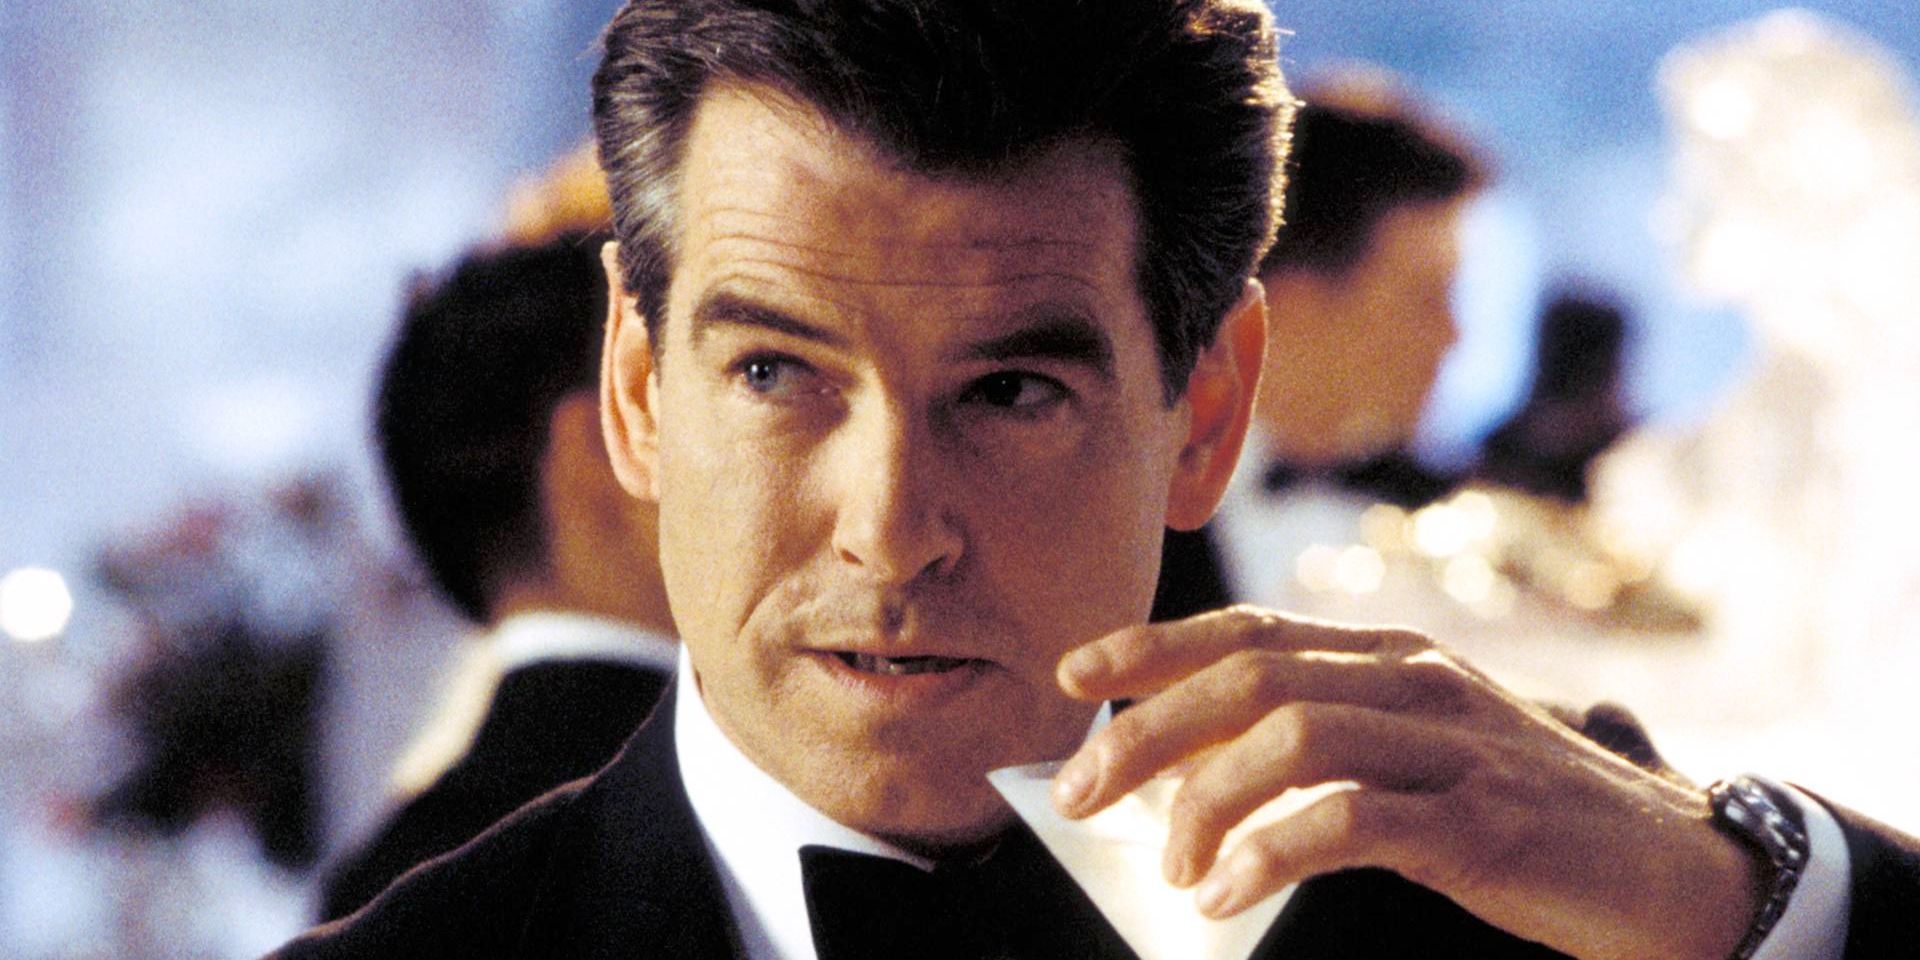 Pierce Brosnan as James Bond holds a drink in Die Another Day